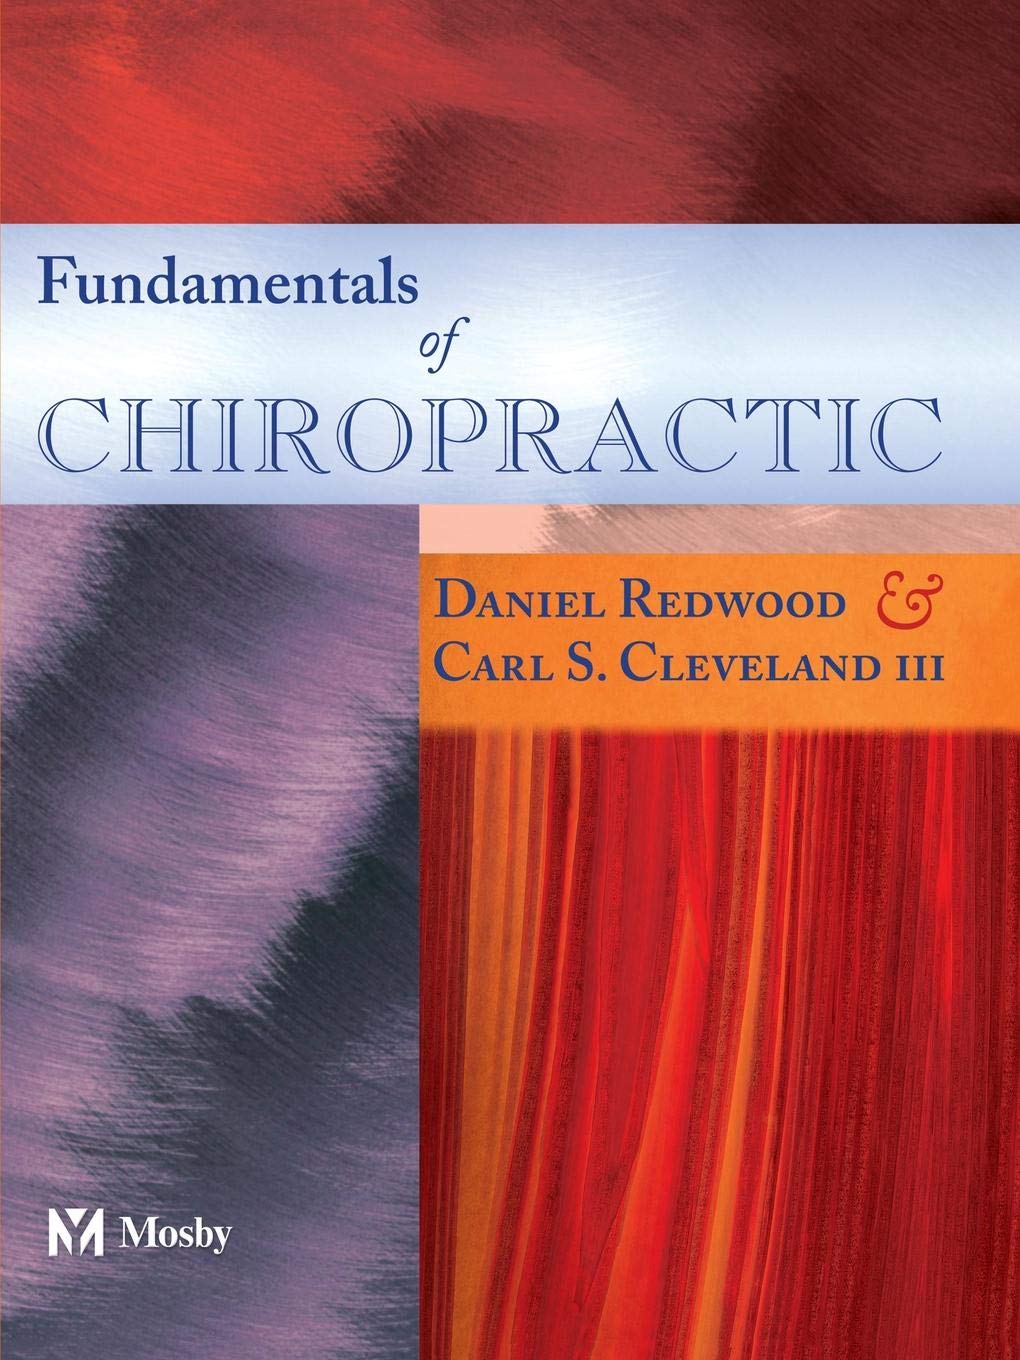 Fundamentals of Chiropractic by Daniel Redwood and Carl Cleveland